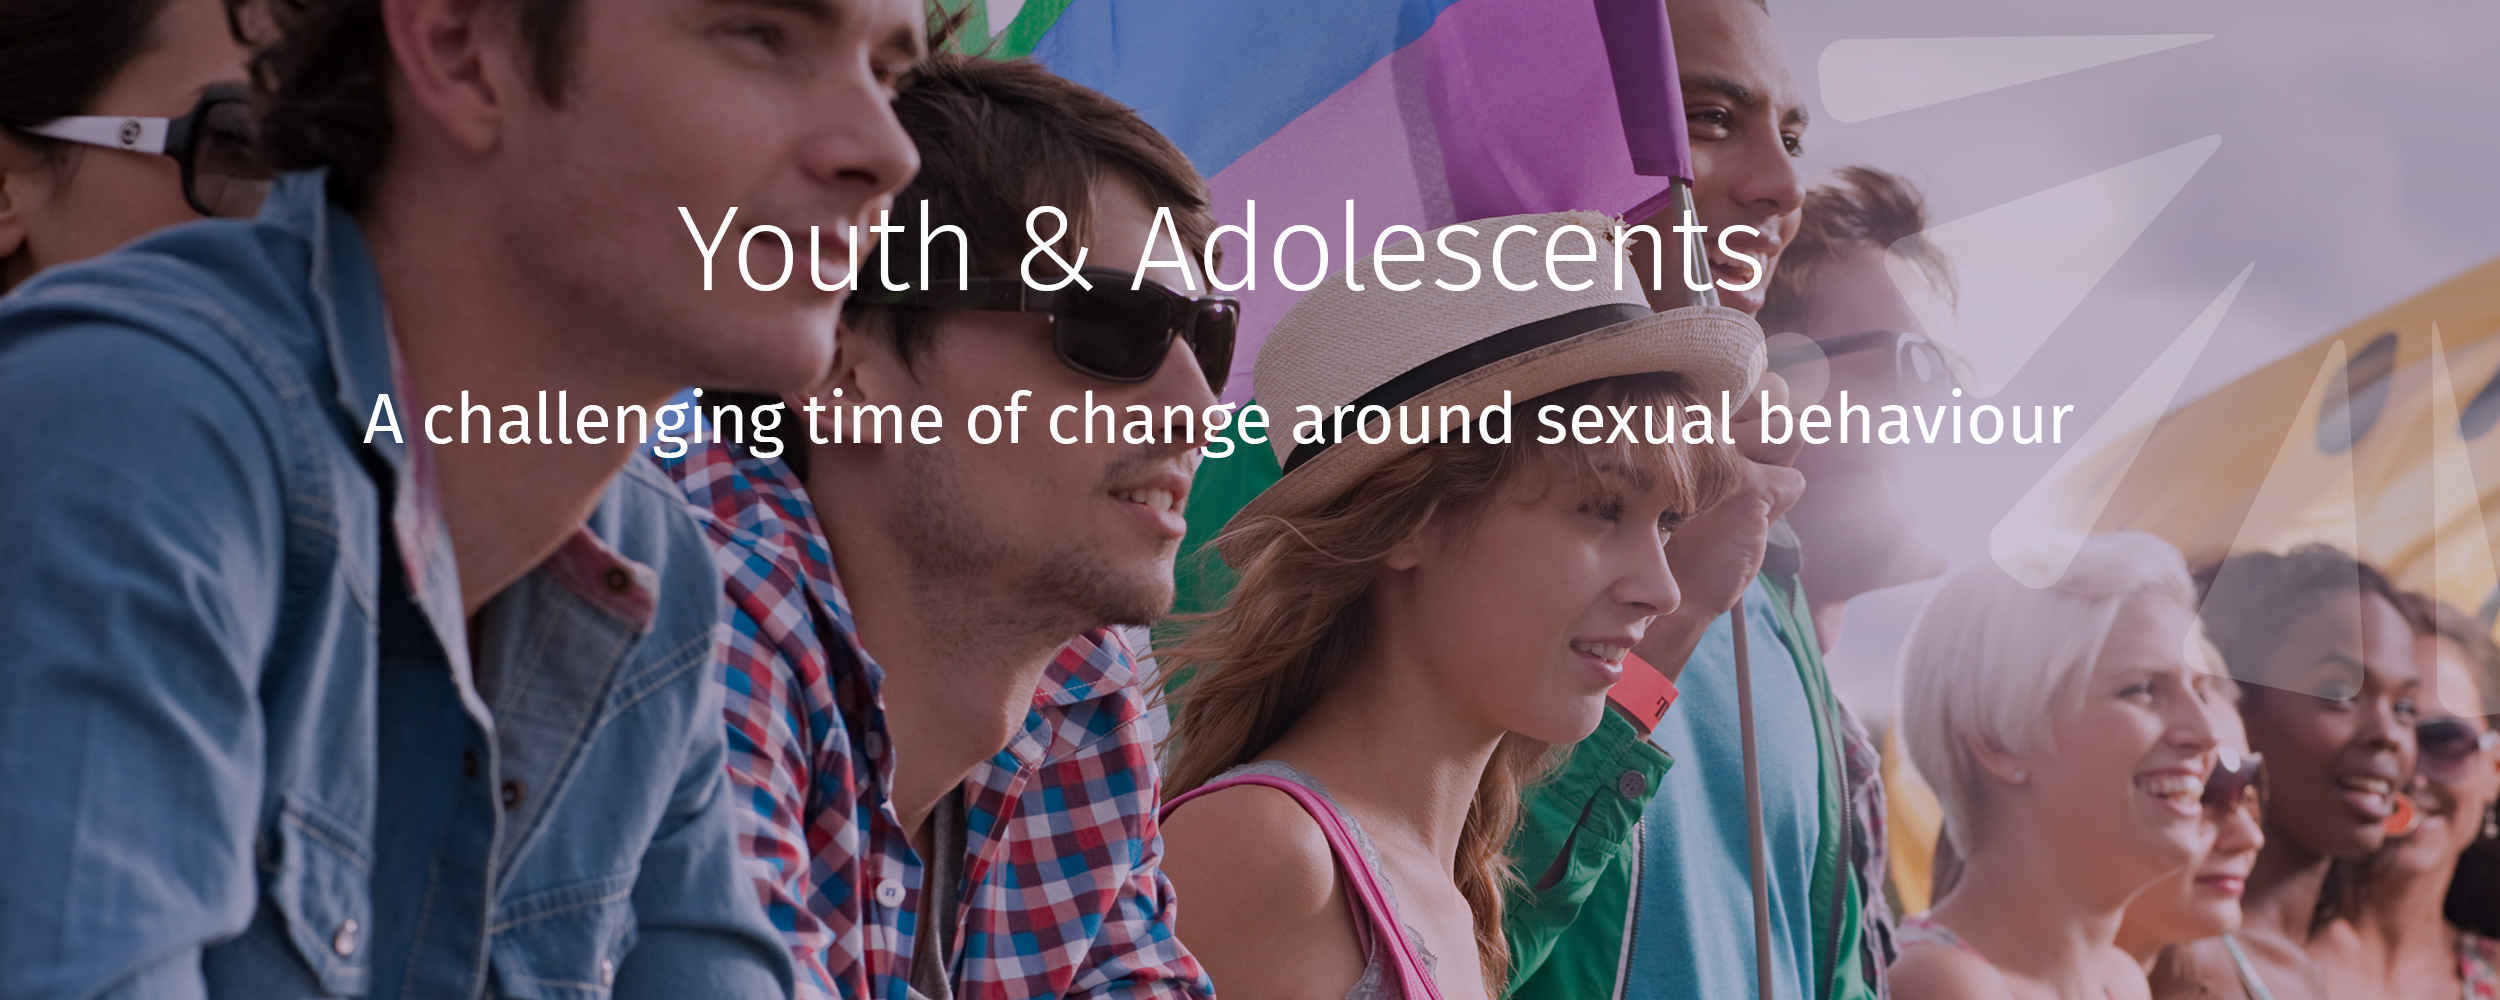 A challenging time of change around sexual behaviour